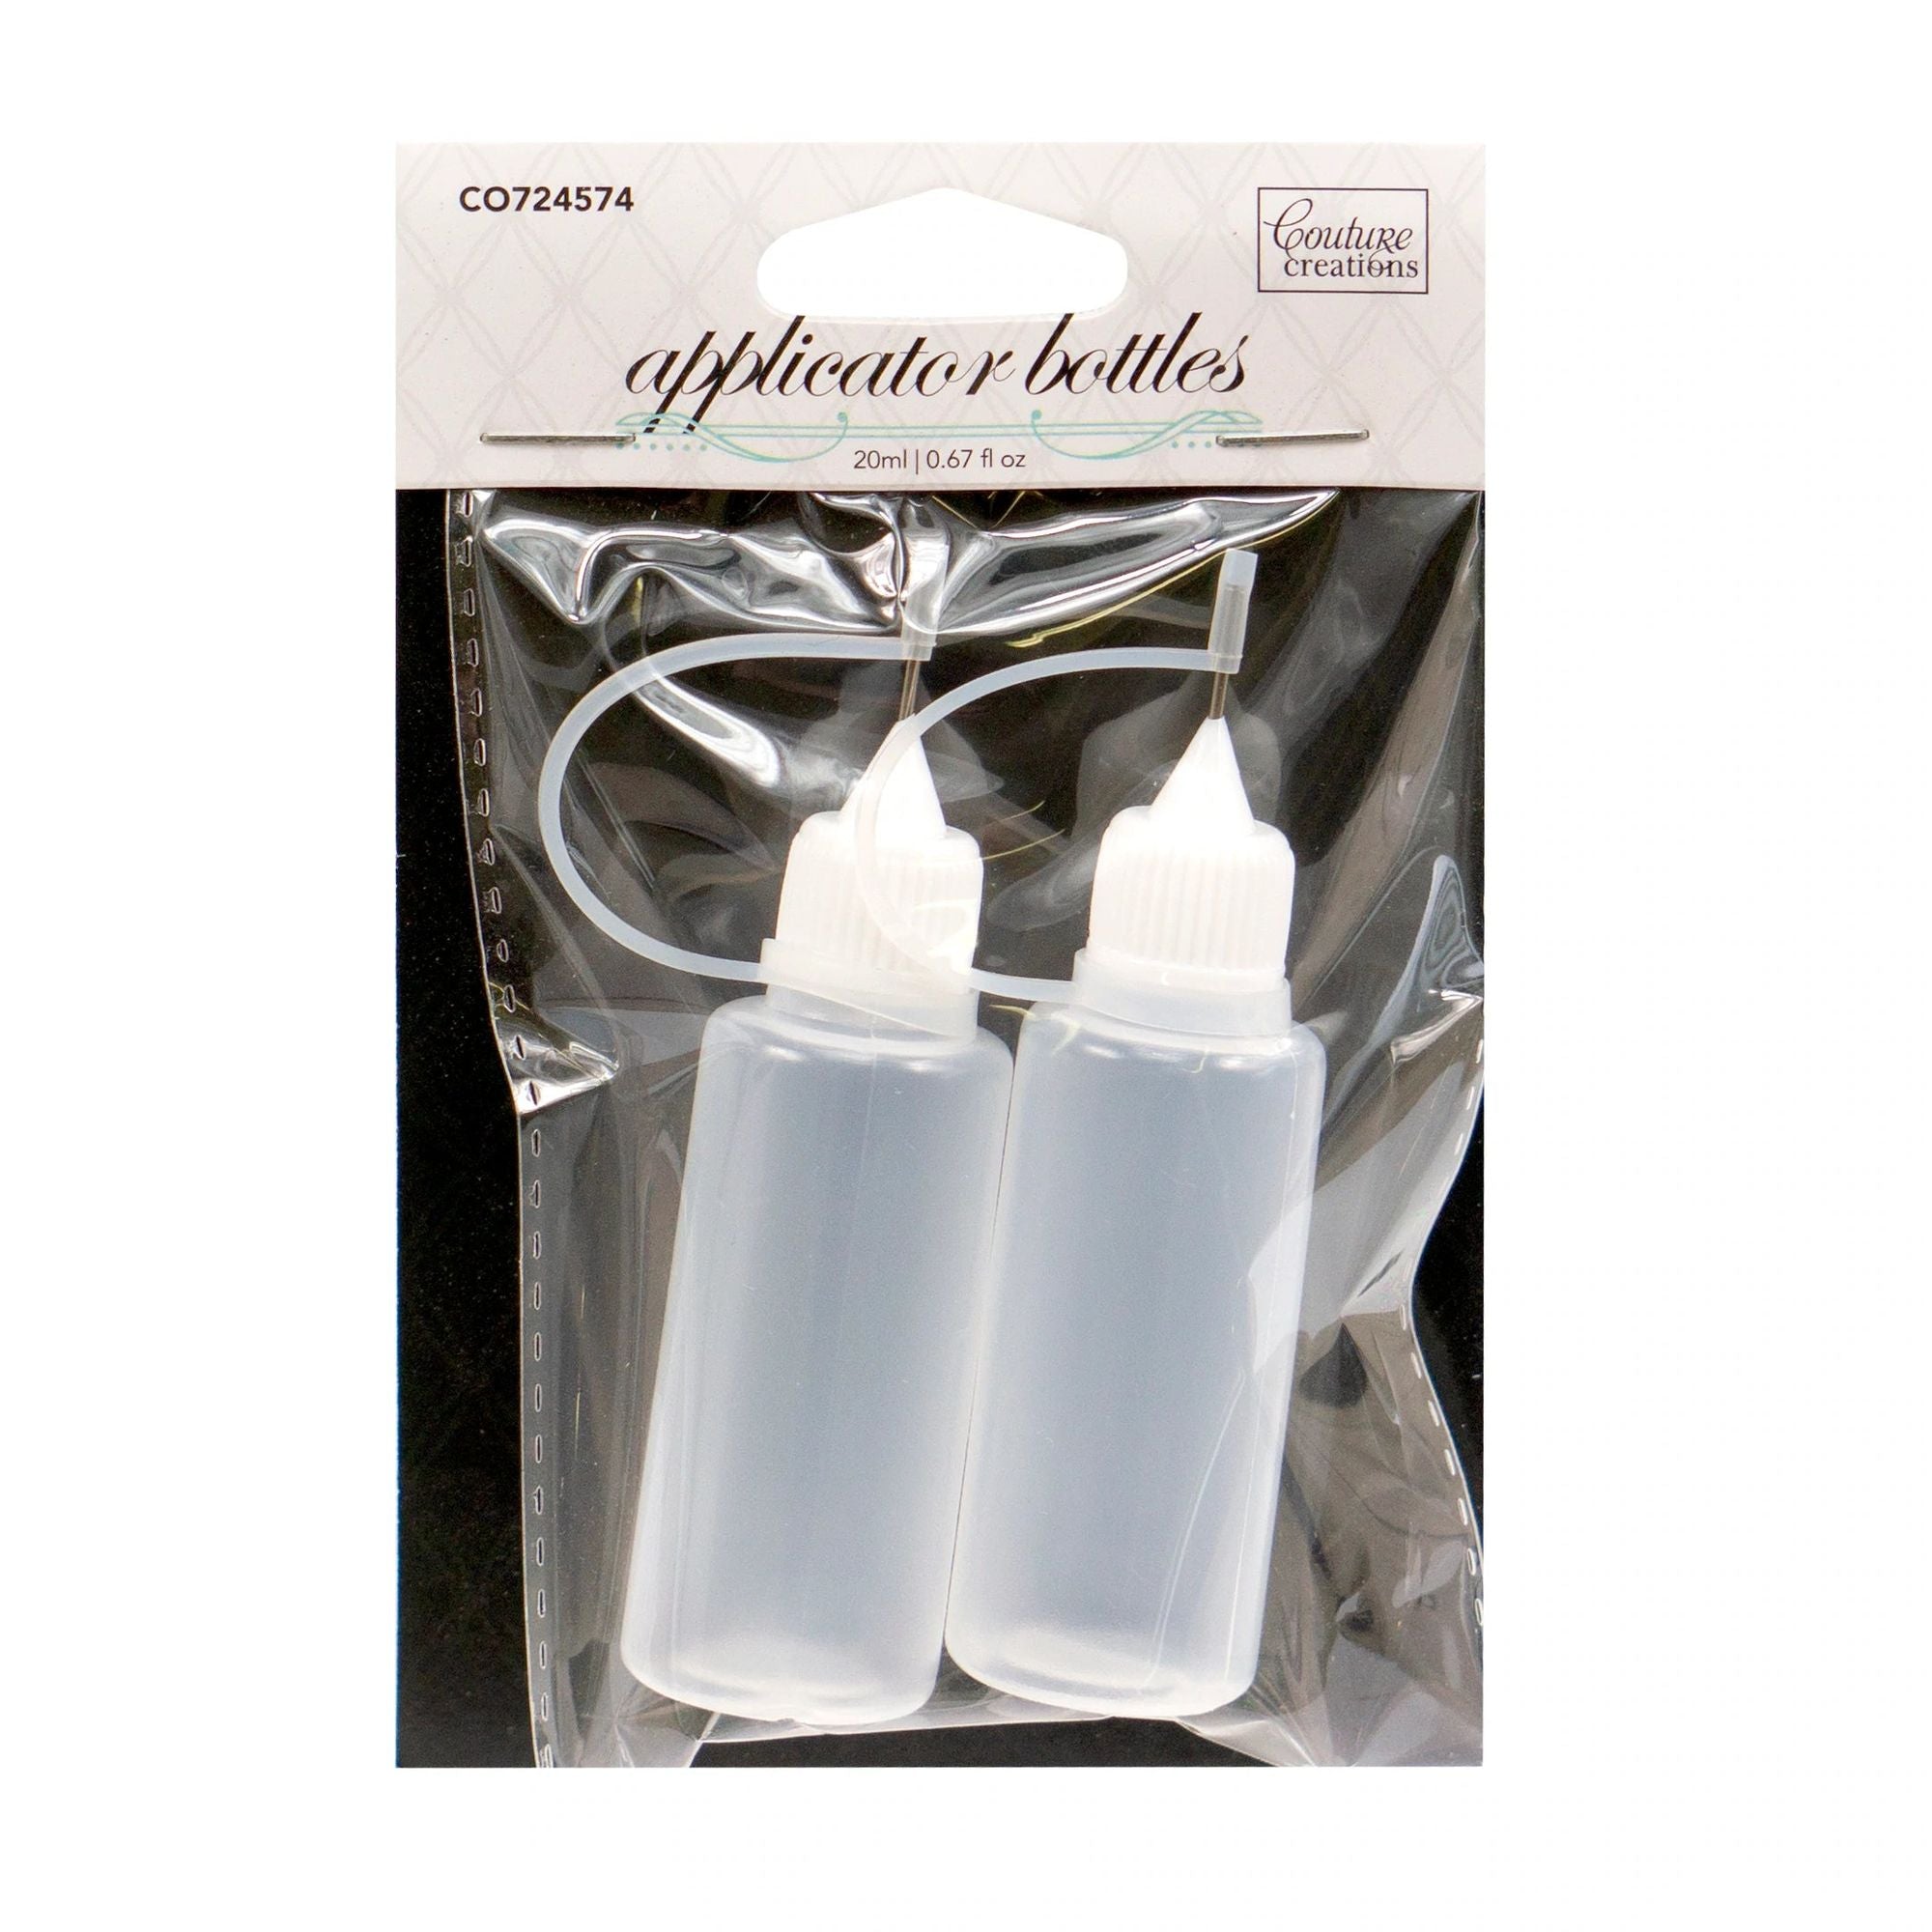 Couture Creations - Applicator Bottles - 20ml With Rustproof Precision